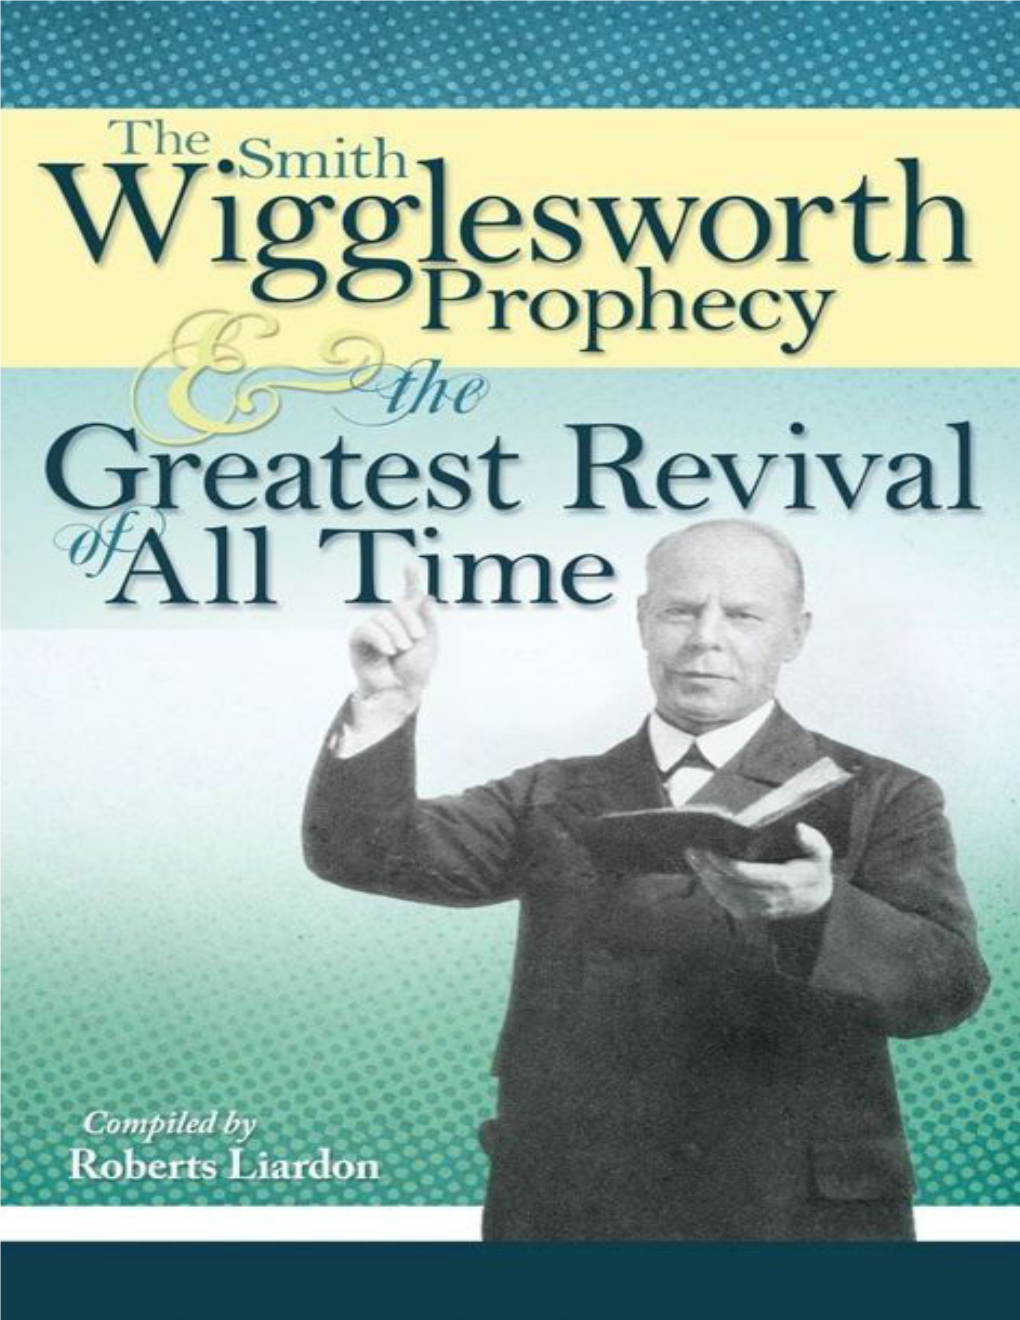 The Smith Wigglesworth Prophecy and the Greatest Revival of All Time ISBN: 978-1-60374-183-5 Ebook ISBN: 978-1-60374-676-2 © 2005, 2013 by Roberts Liardon